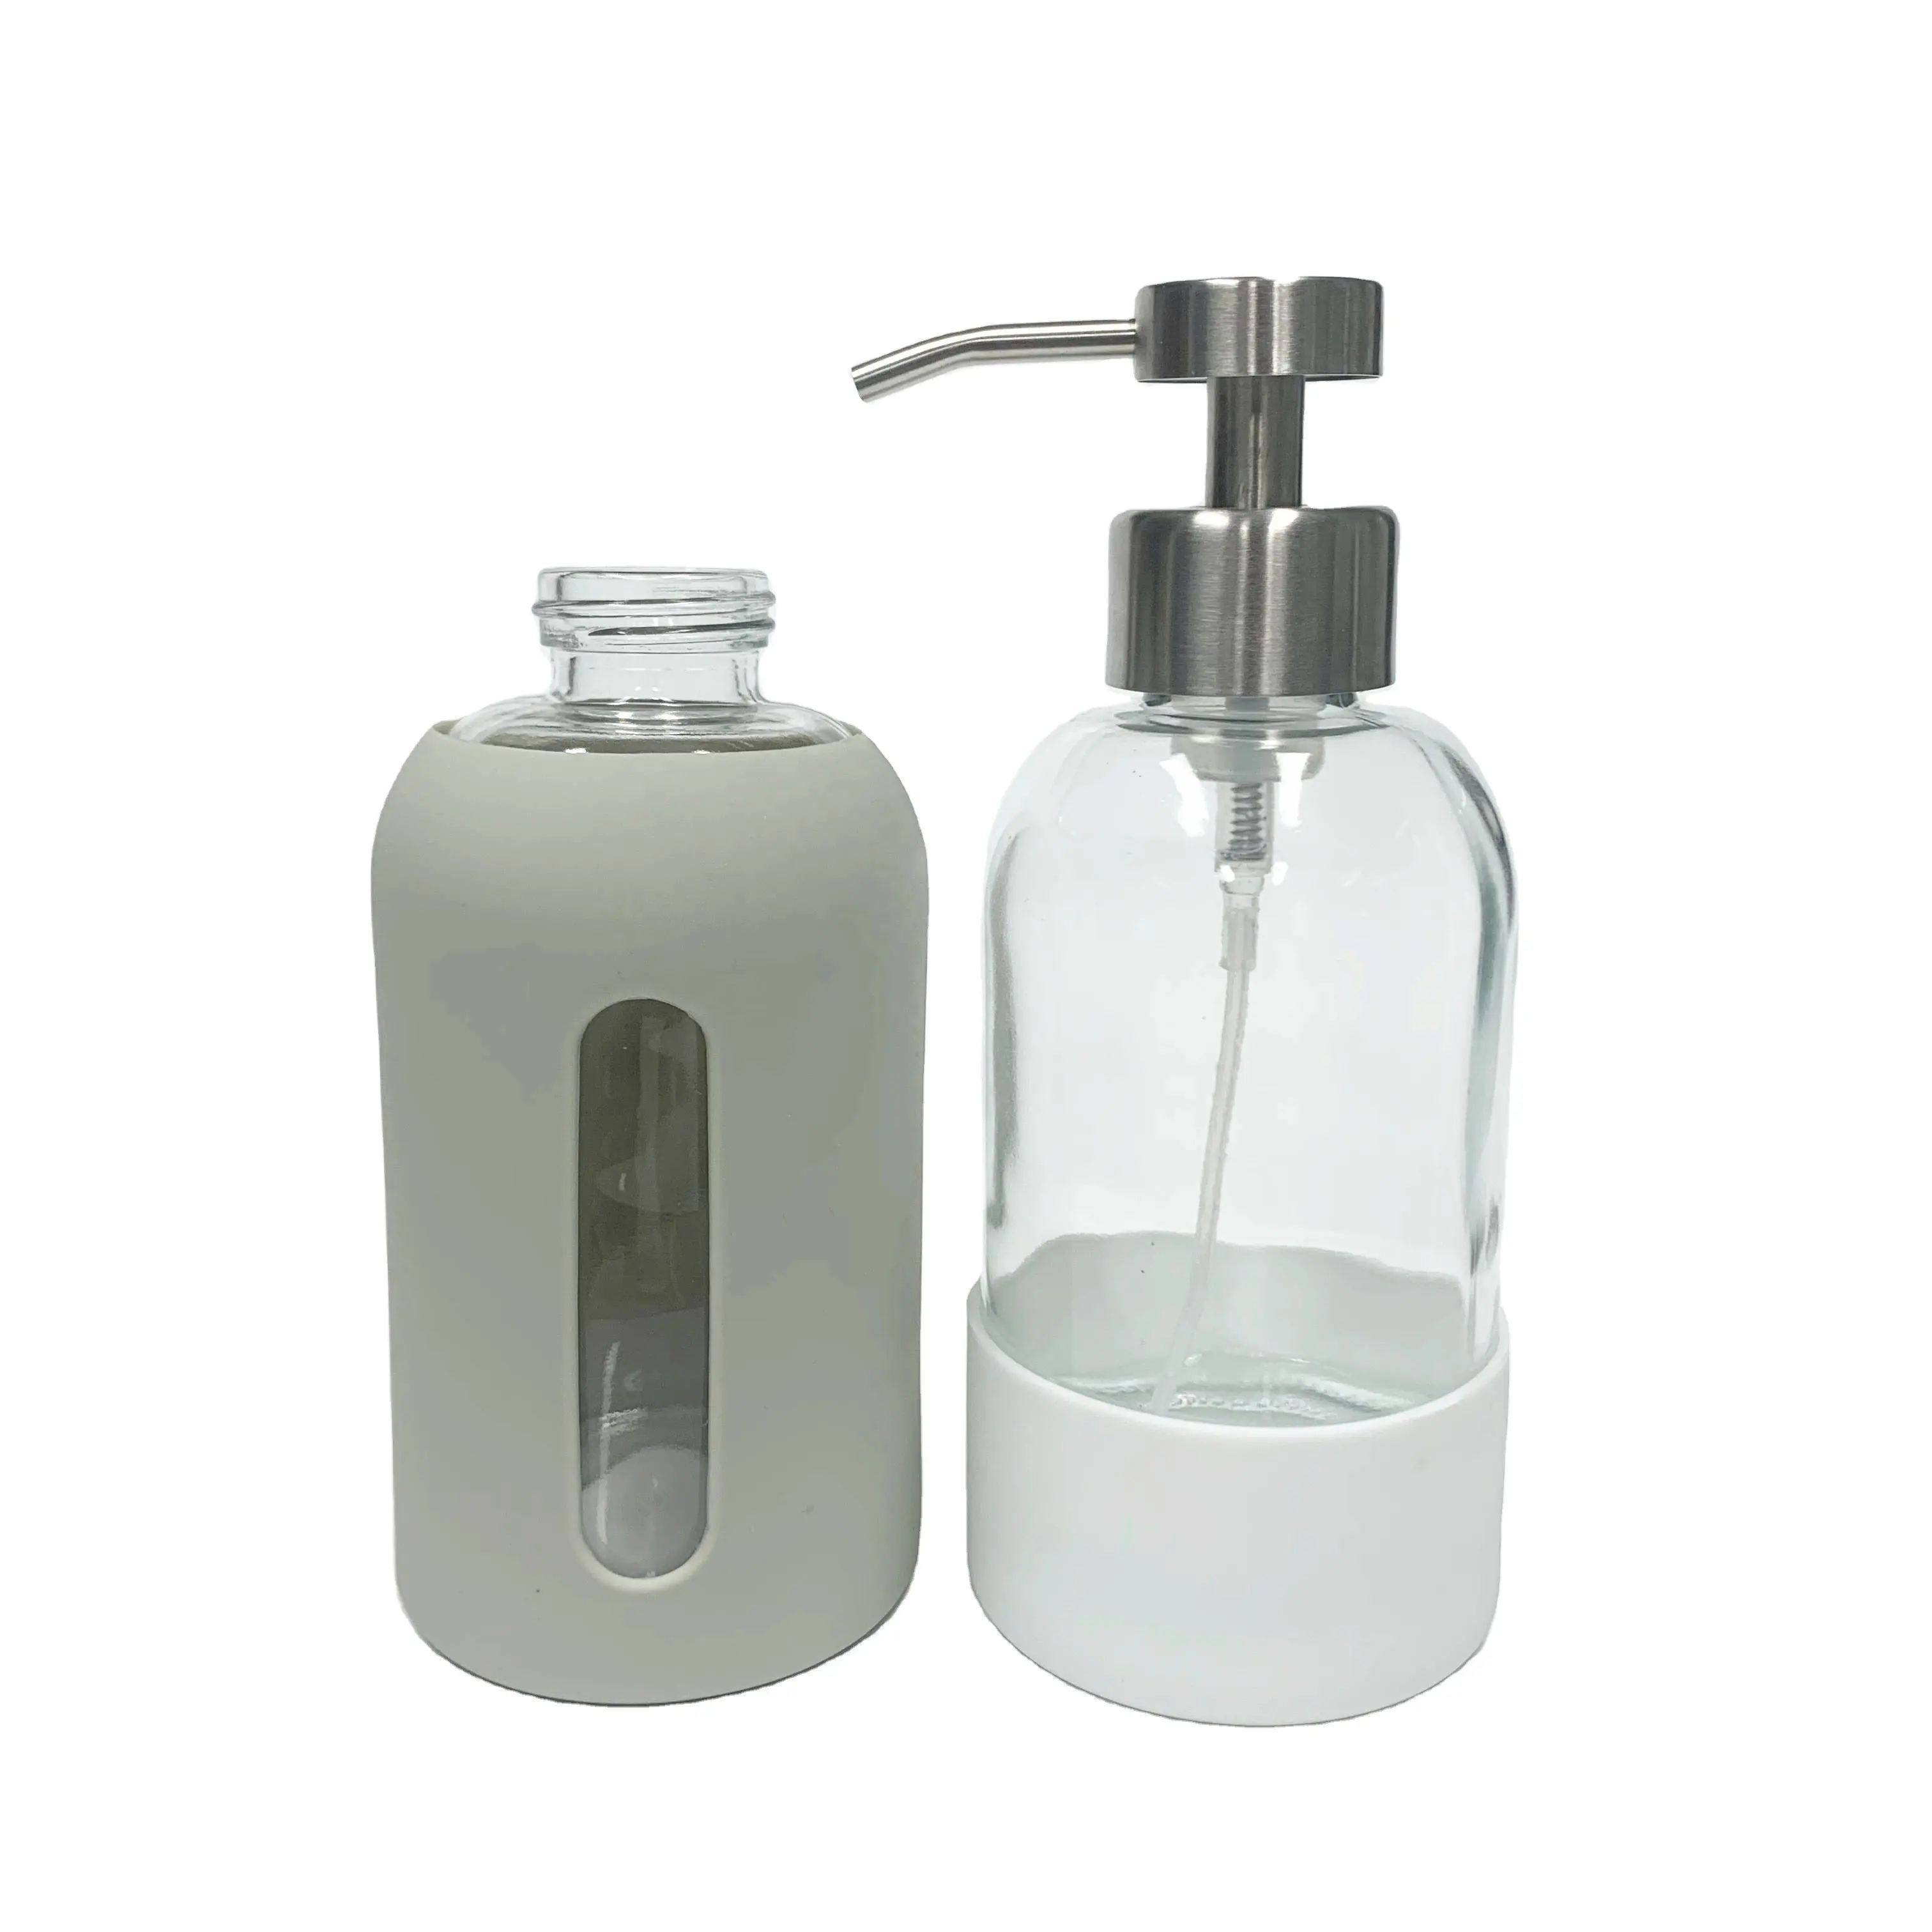 Glass Soap Dispenser China Trade,Buy China Direct From Glass Soap 